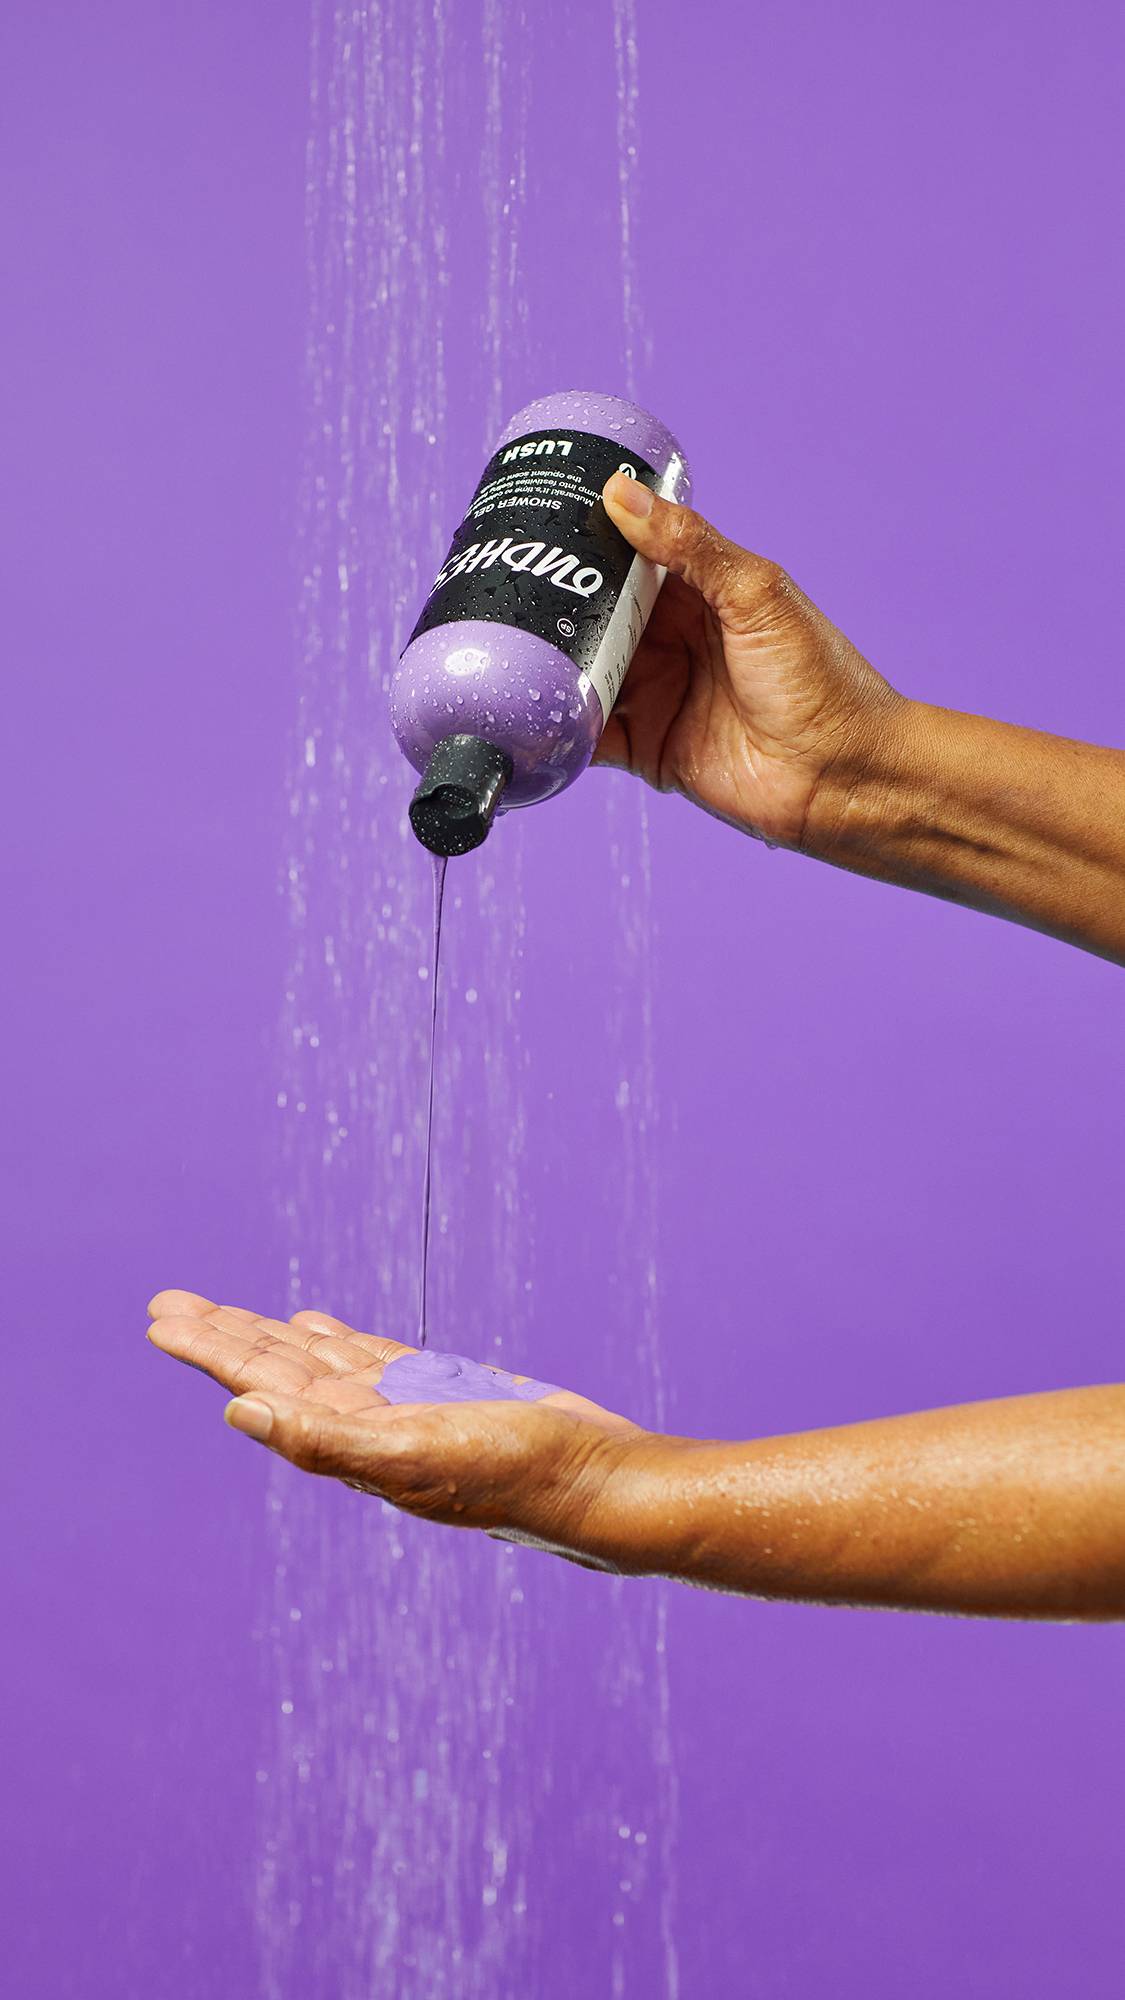 A close-up of the model's hands under running as they gently squeeze the creamy, glossy shower gel from the product bottle into their open palm.